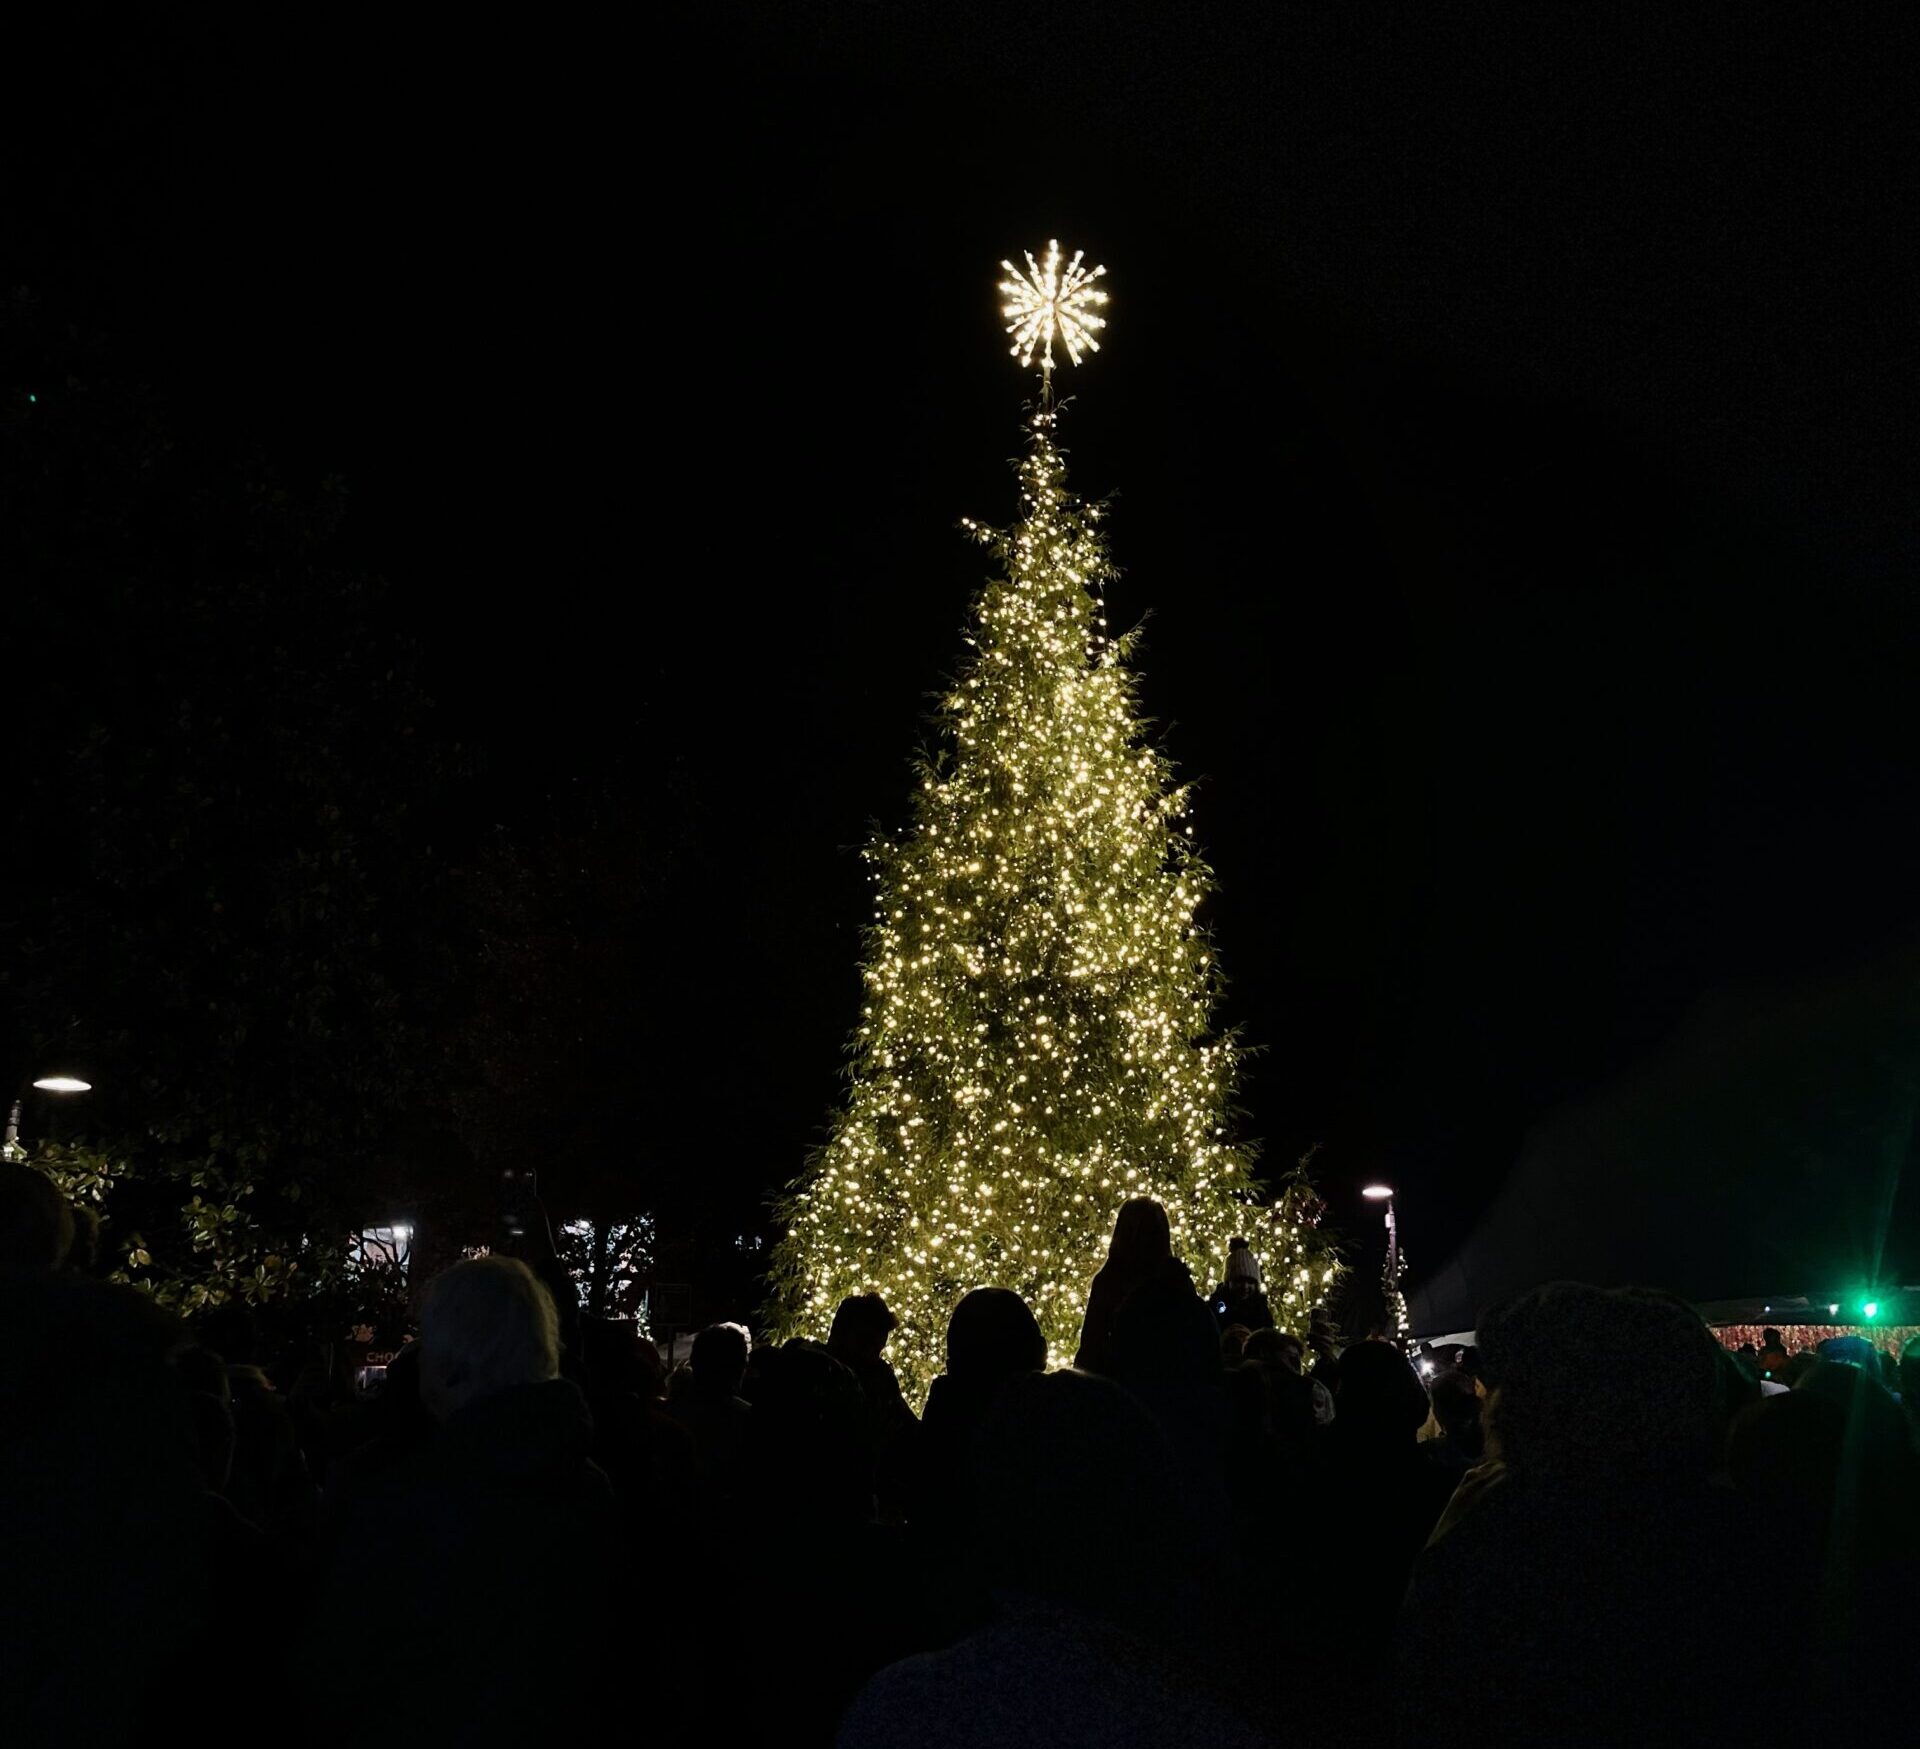 A Christmas tree lit up with white lights with a large star on top in a dark crowd.